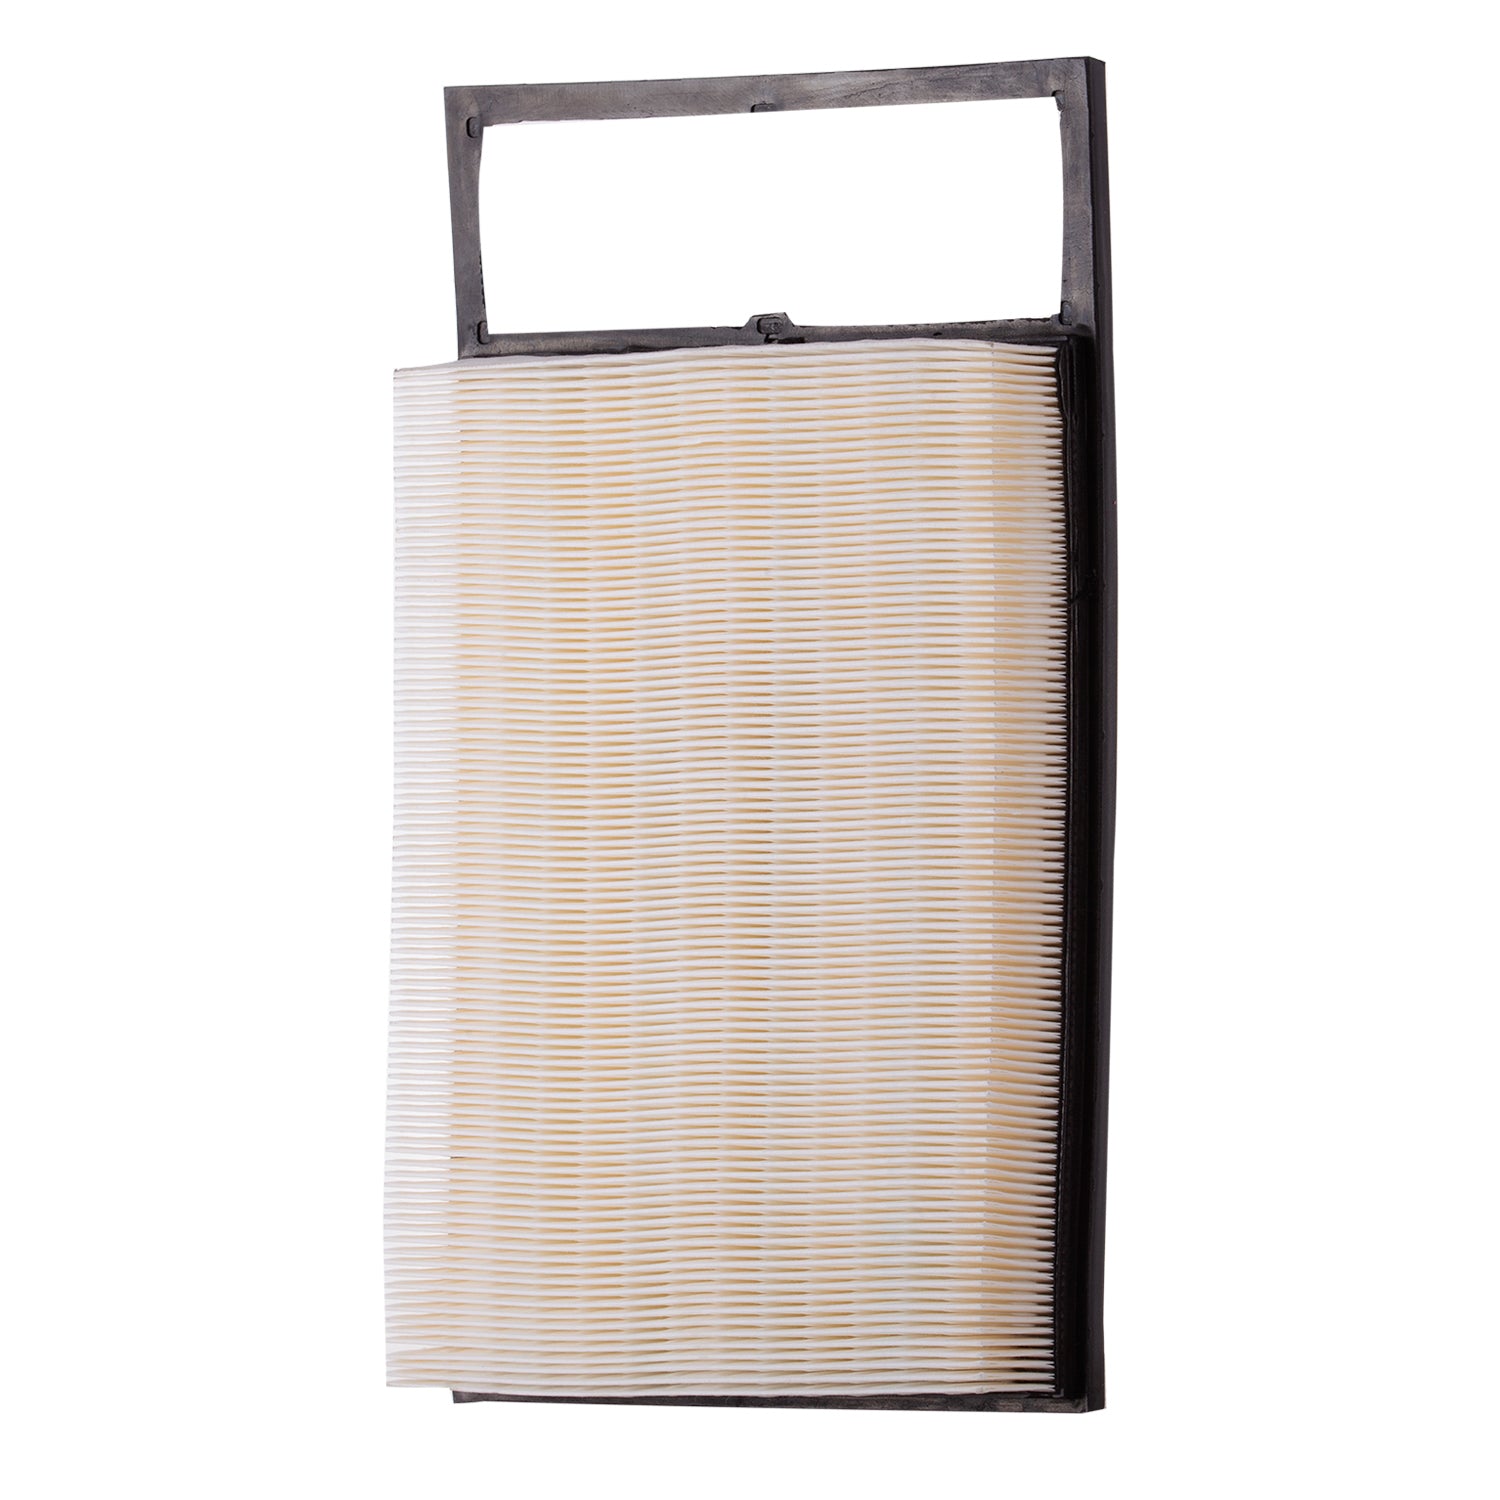 2019 Fiat Palio Air Filter  PA80051